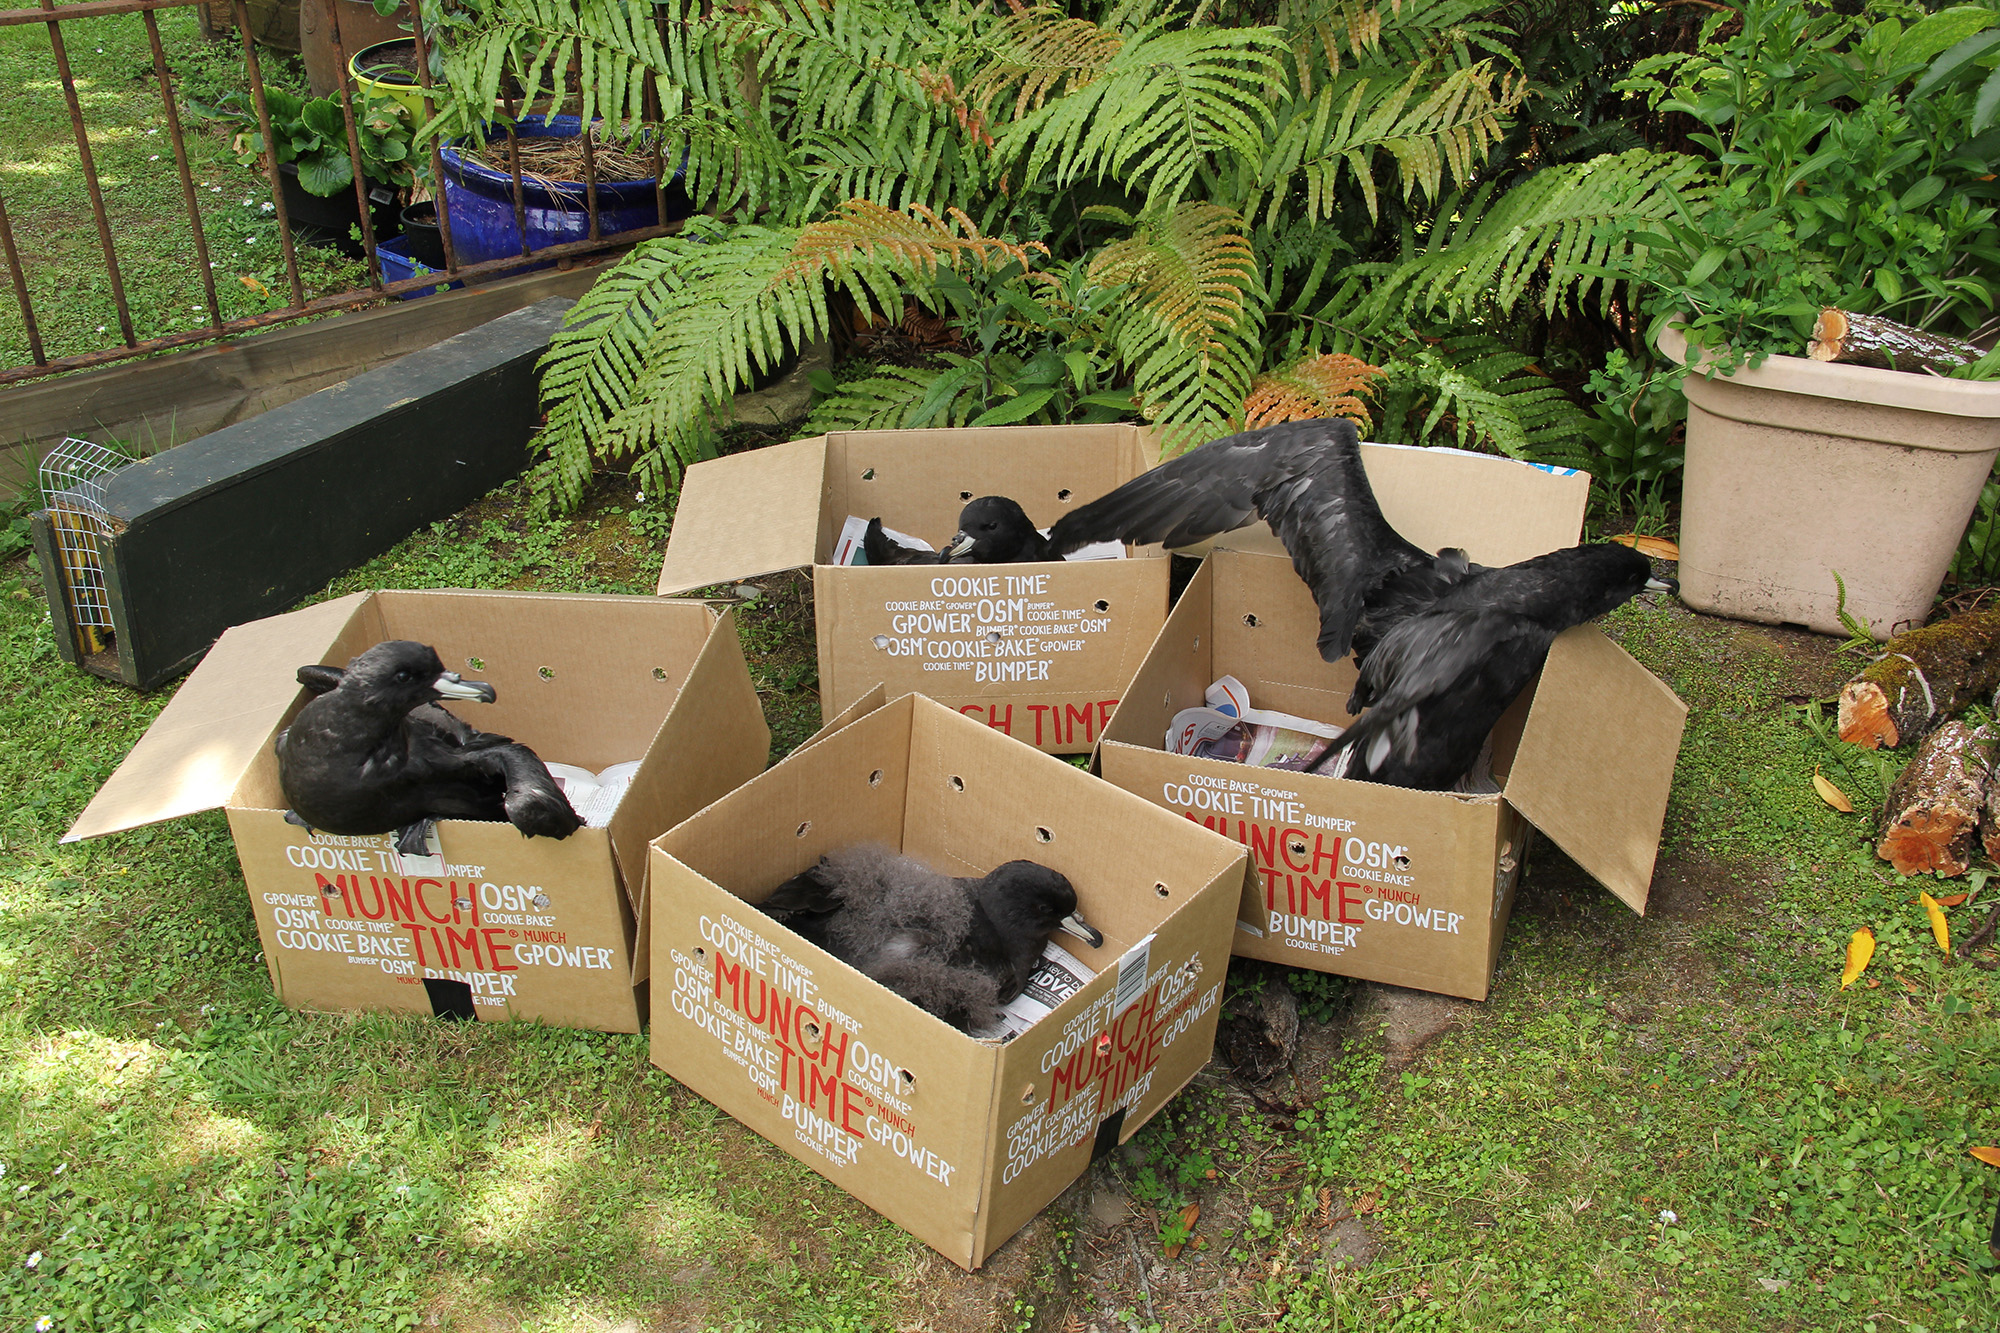 Four boxes with a petrel bird in each.